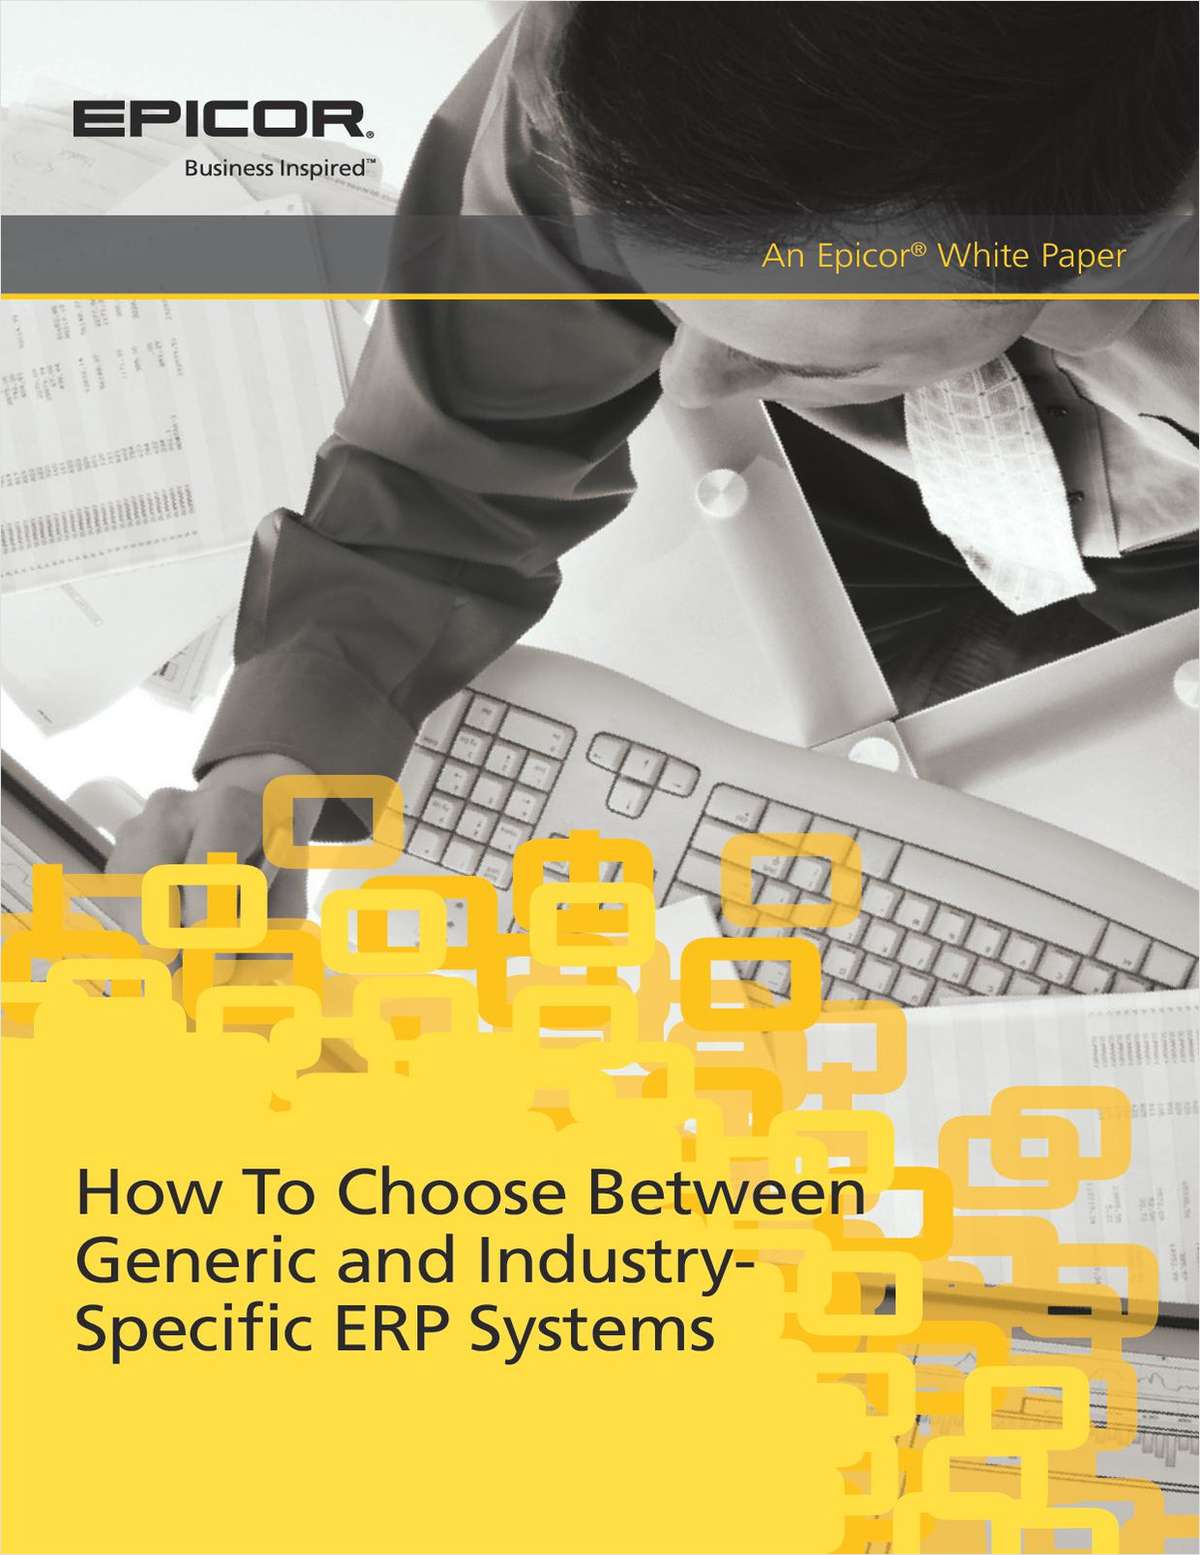 Best Practices to Choose Between Generic and Industry- Specific ERP Systems